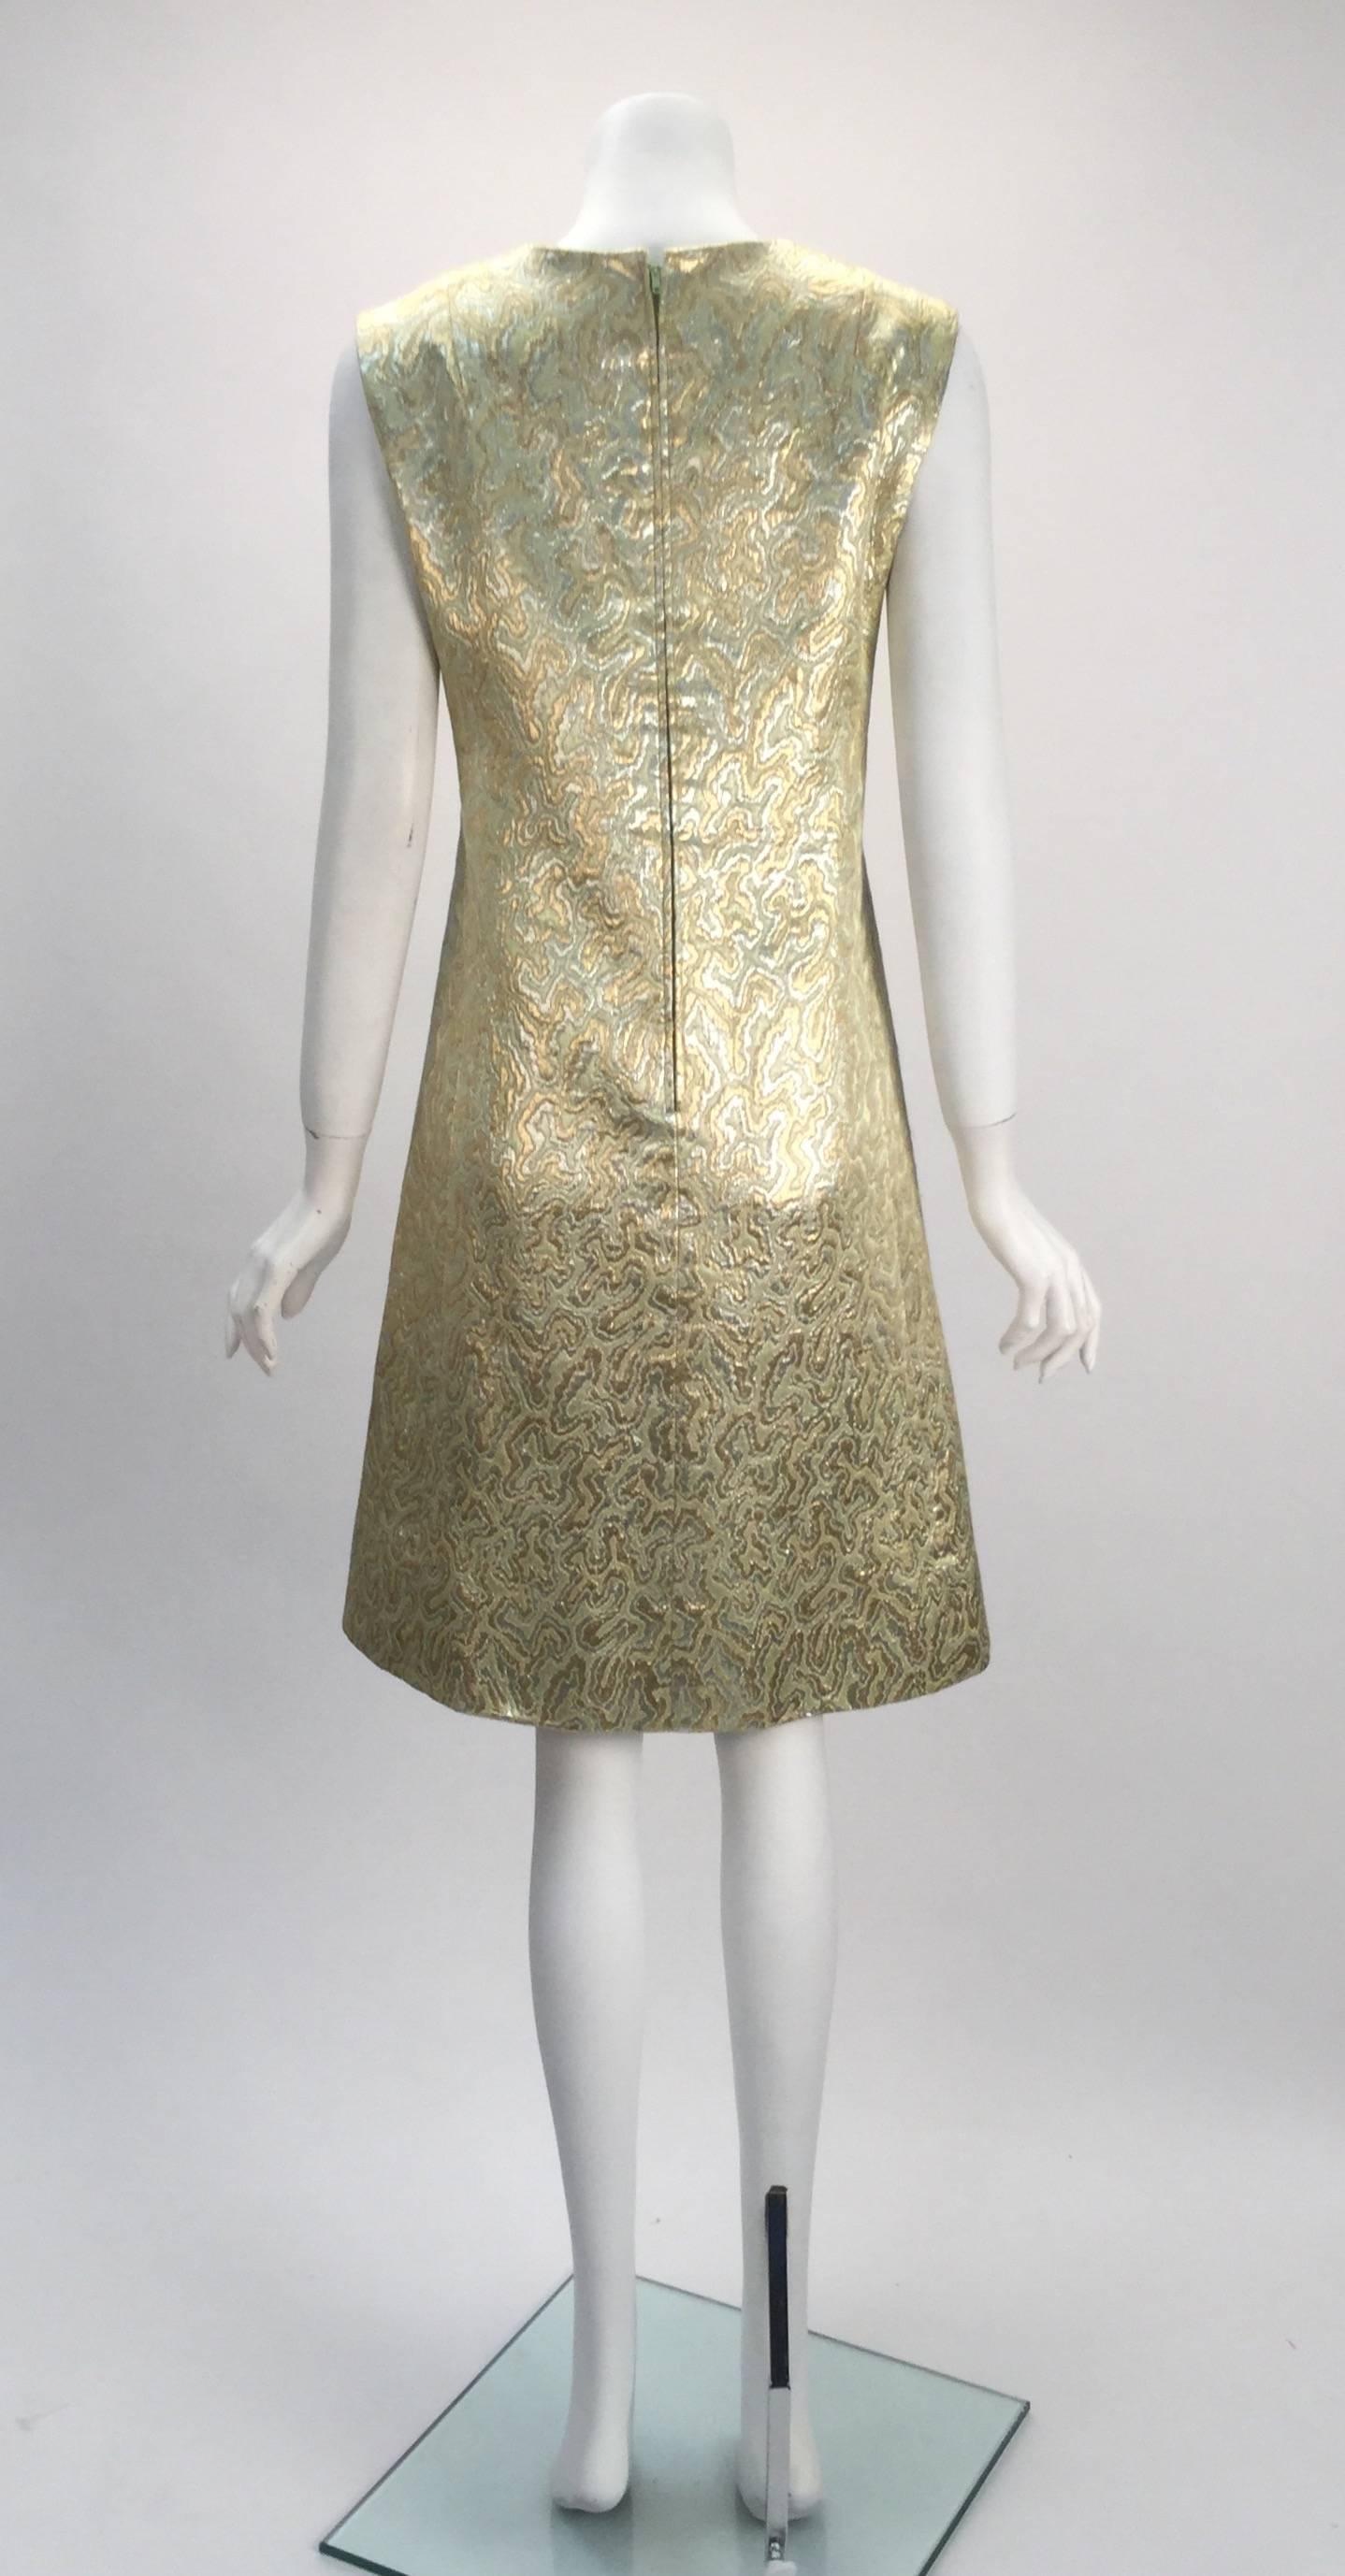 1960s Malcolm Starr Brocade Dress Jacket and Hat Ensemble 1